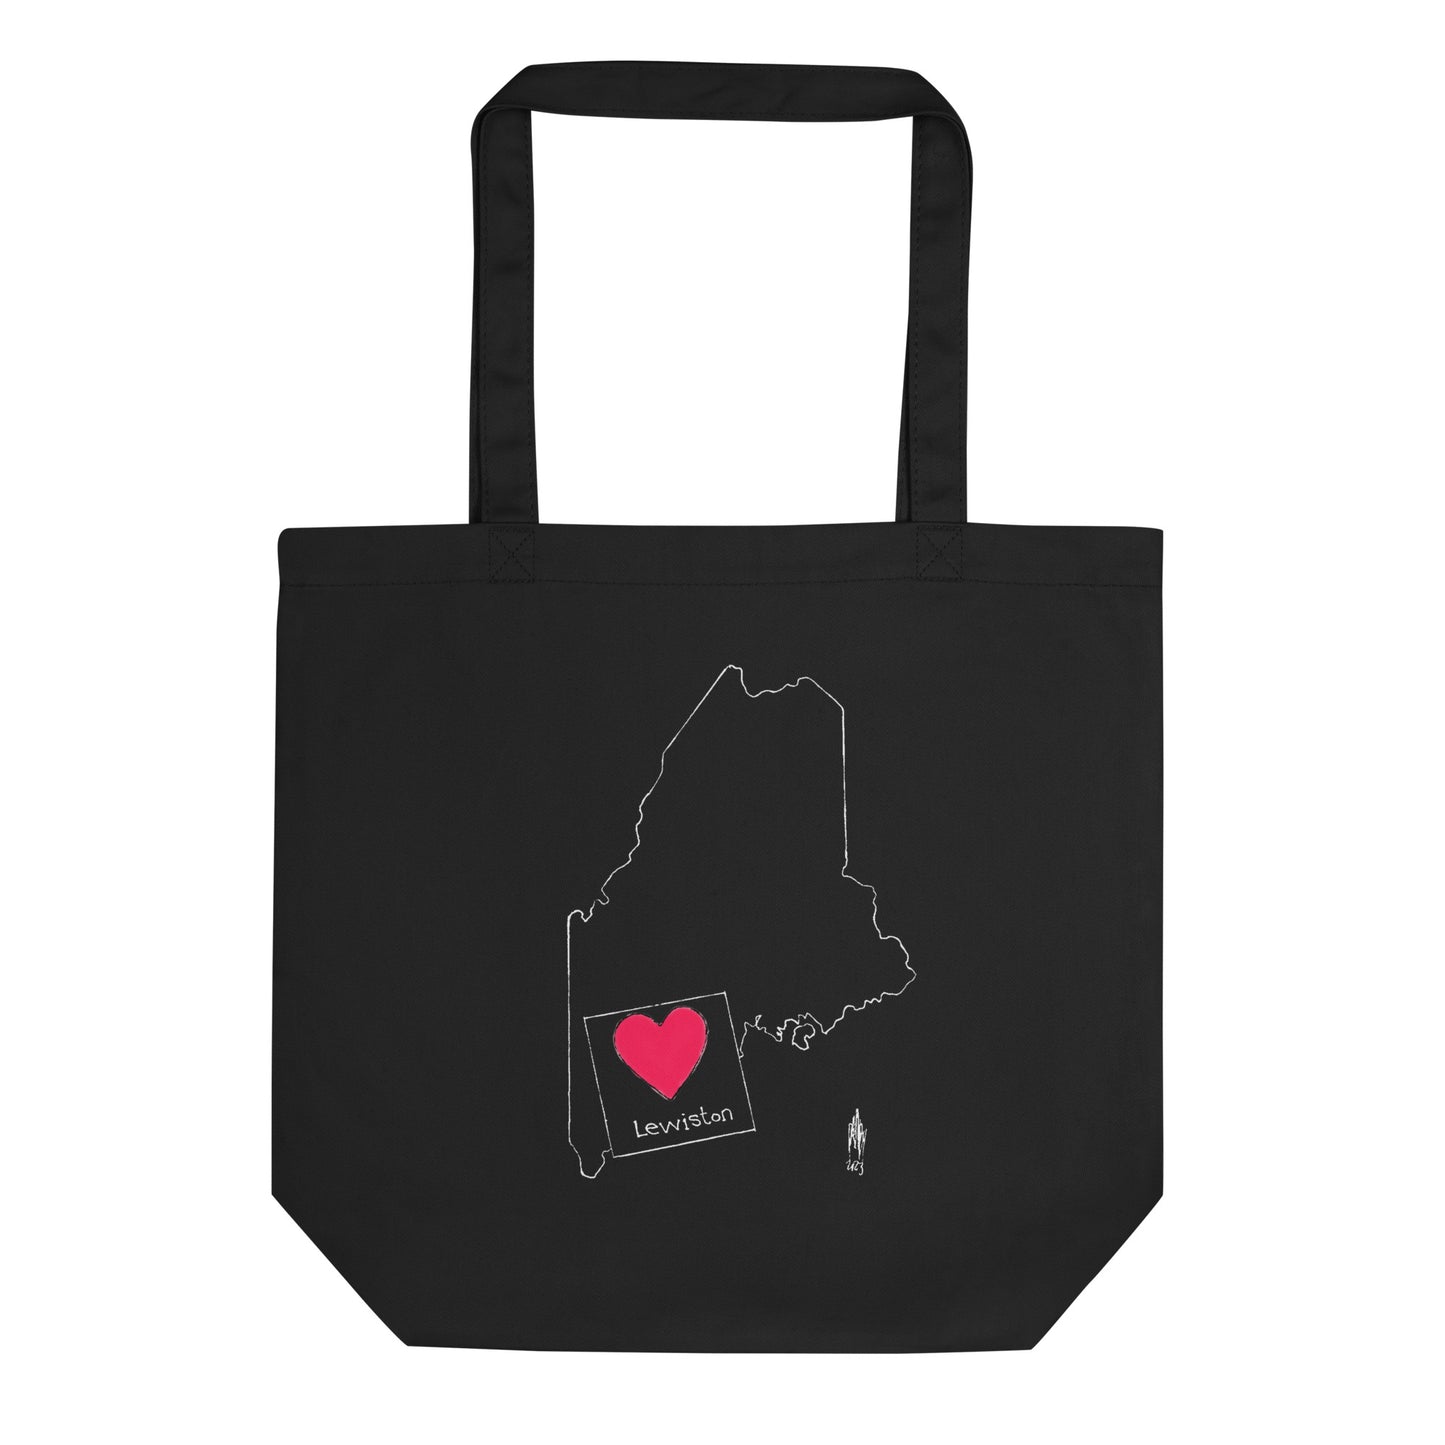 Lewiston Eco Tote Bag Double Sided